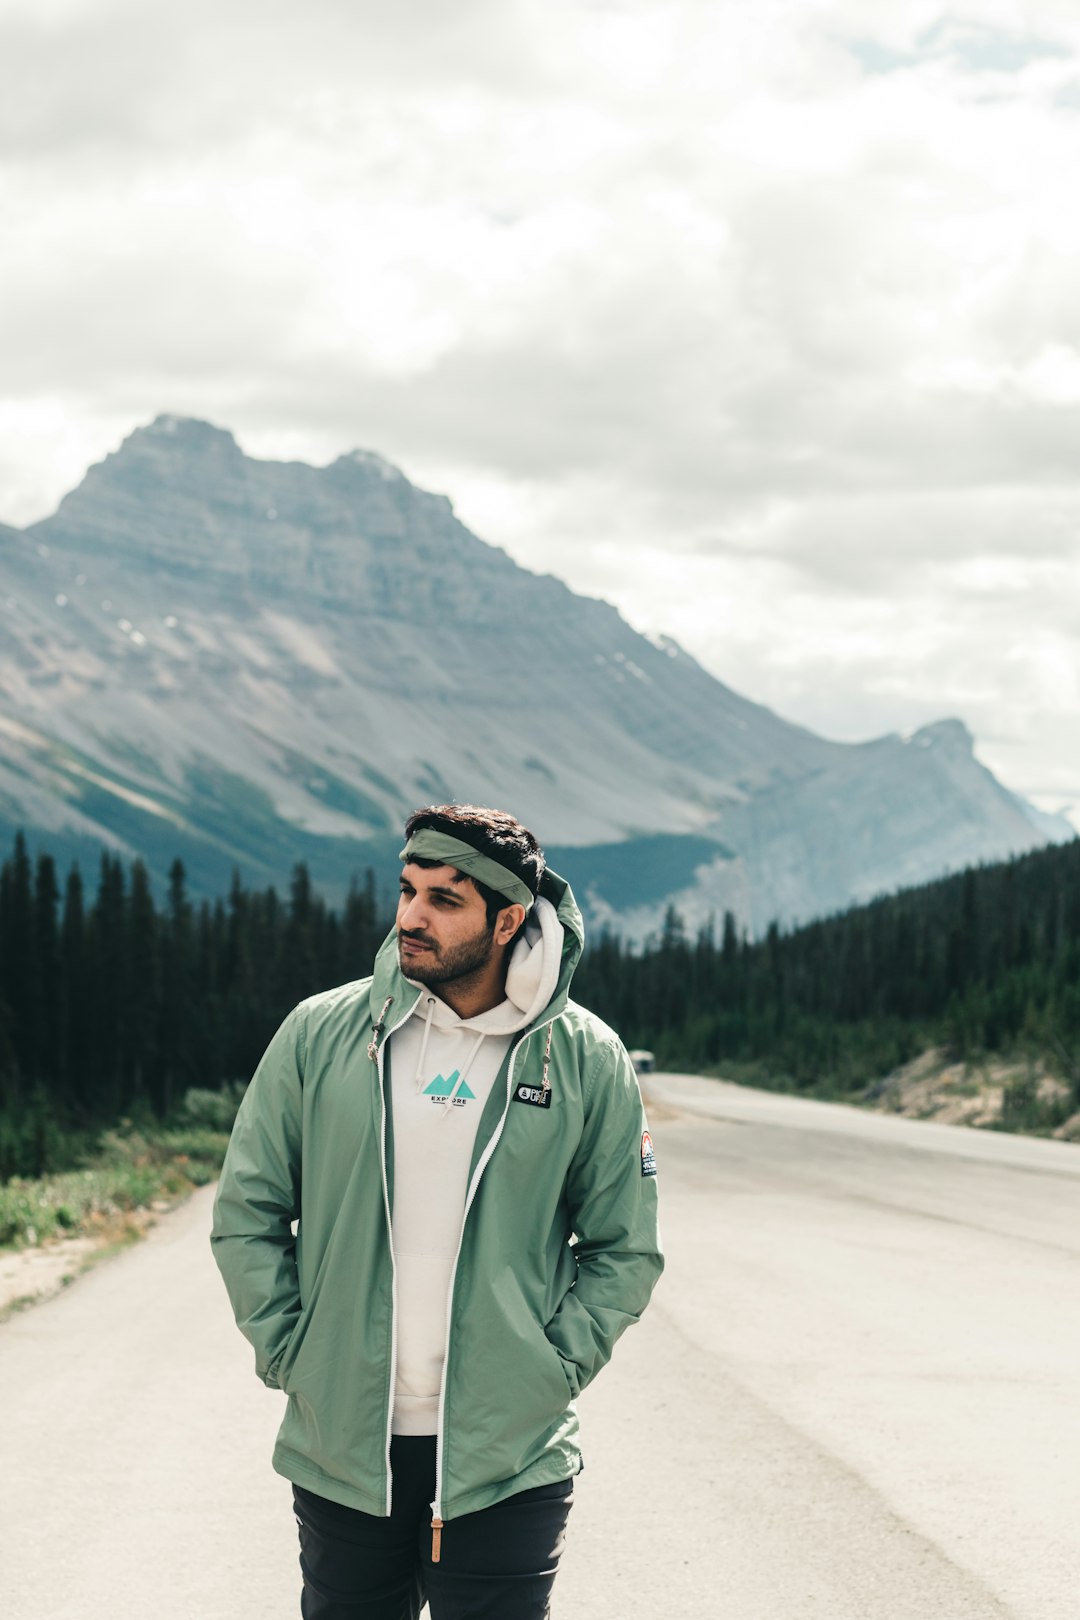 man in green jacket standing on road near green trees and mountain during daytime